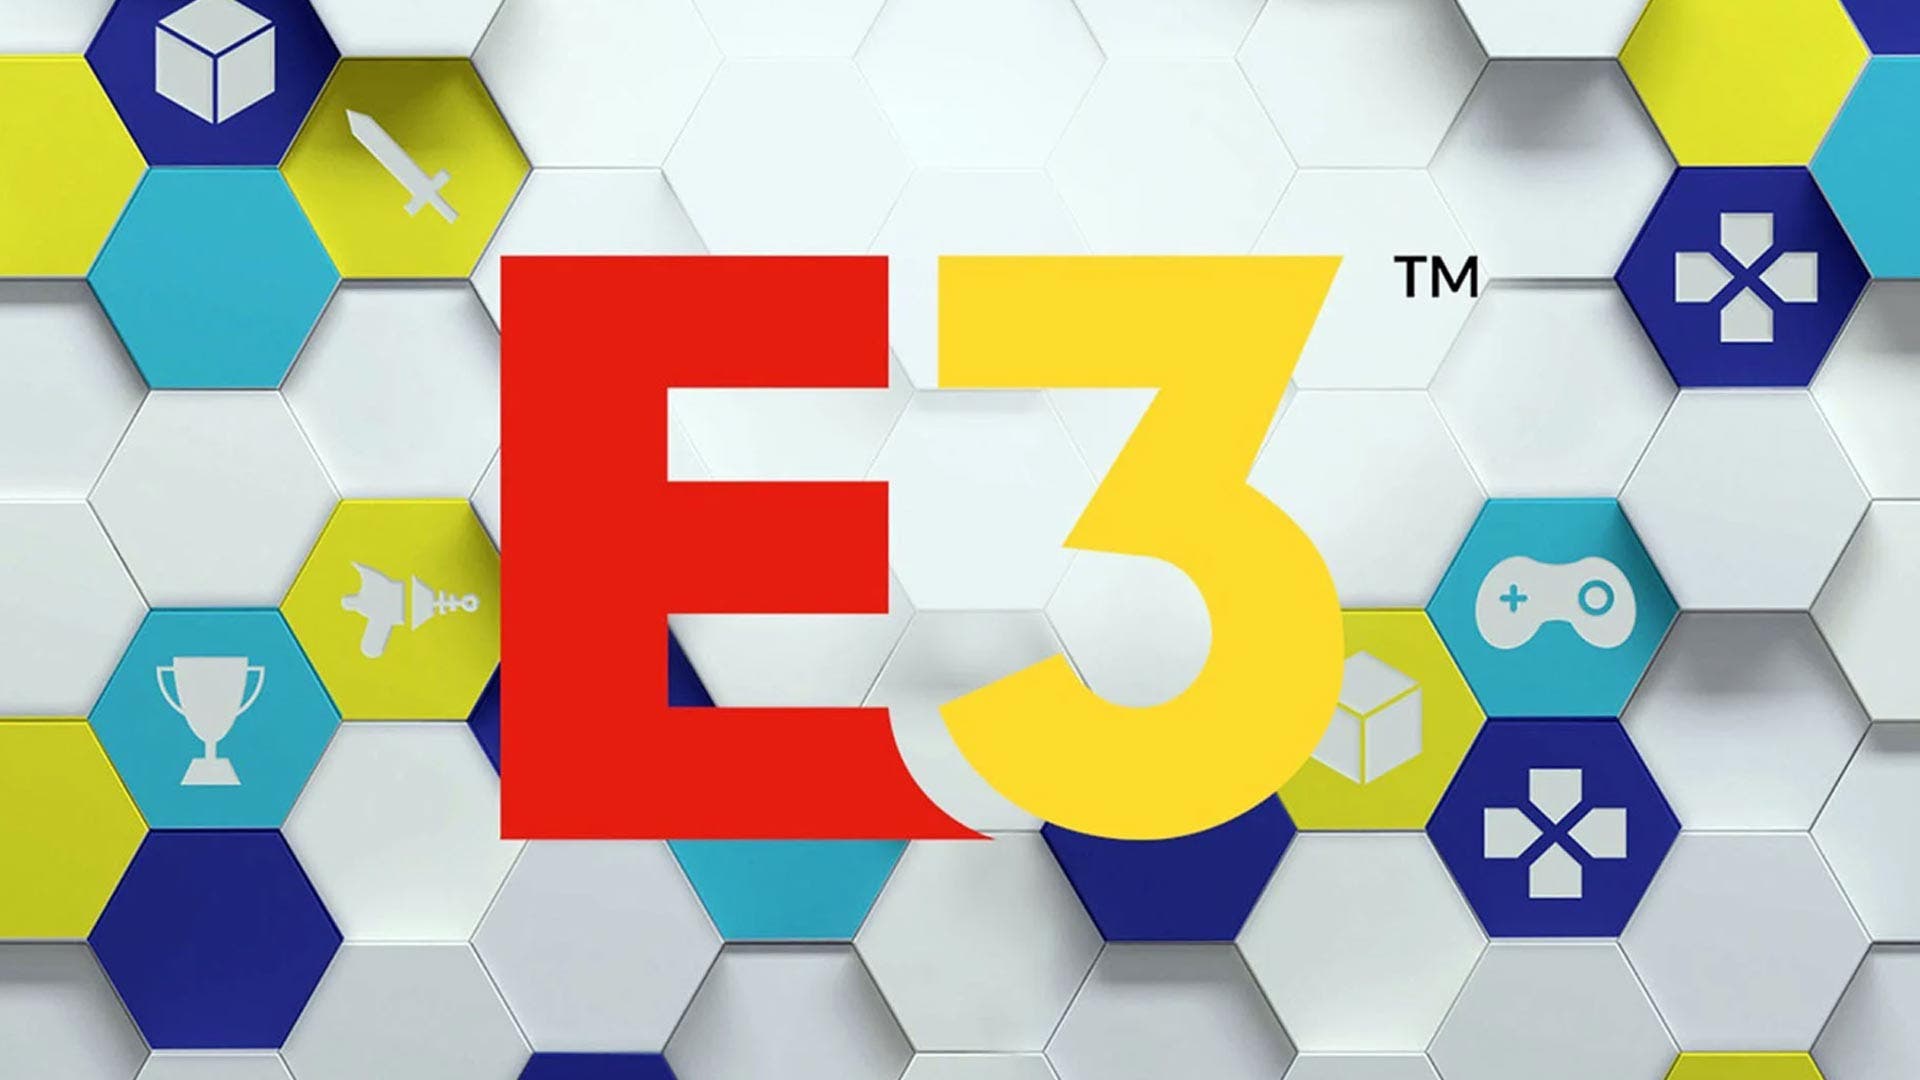 E3 2021: Three big publishers join the list of participants